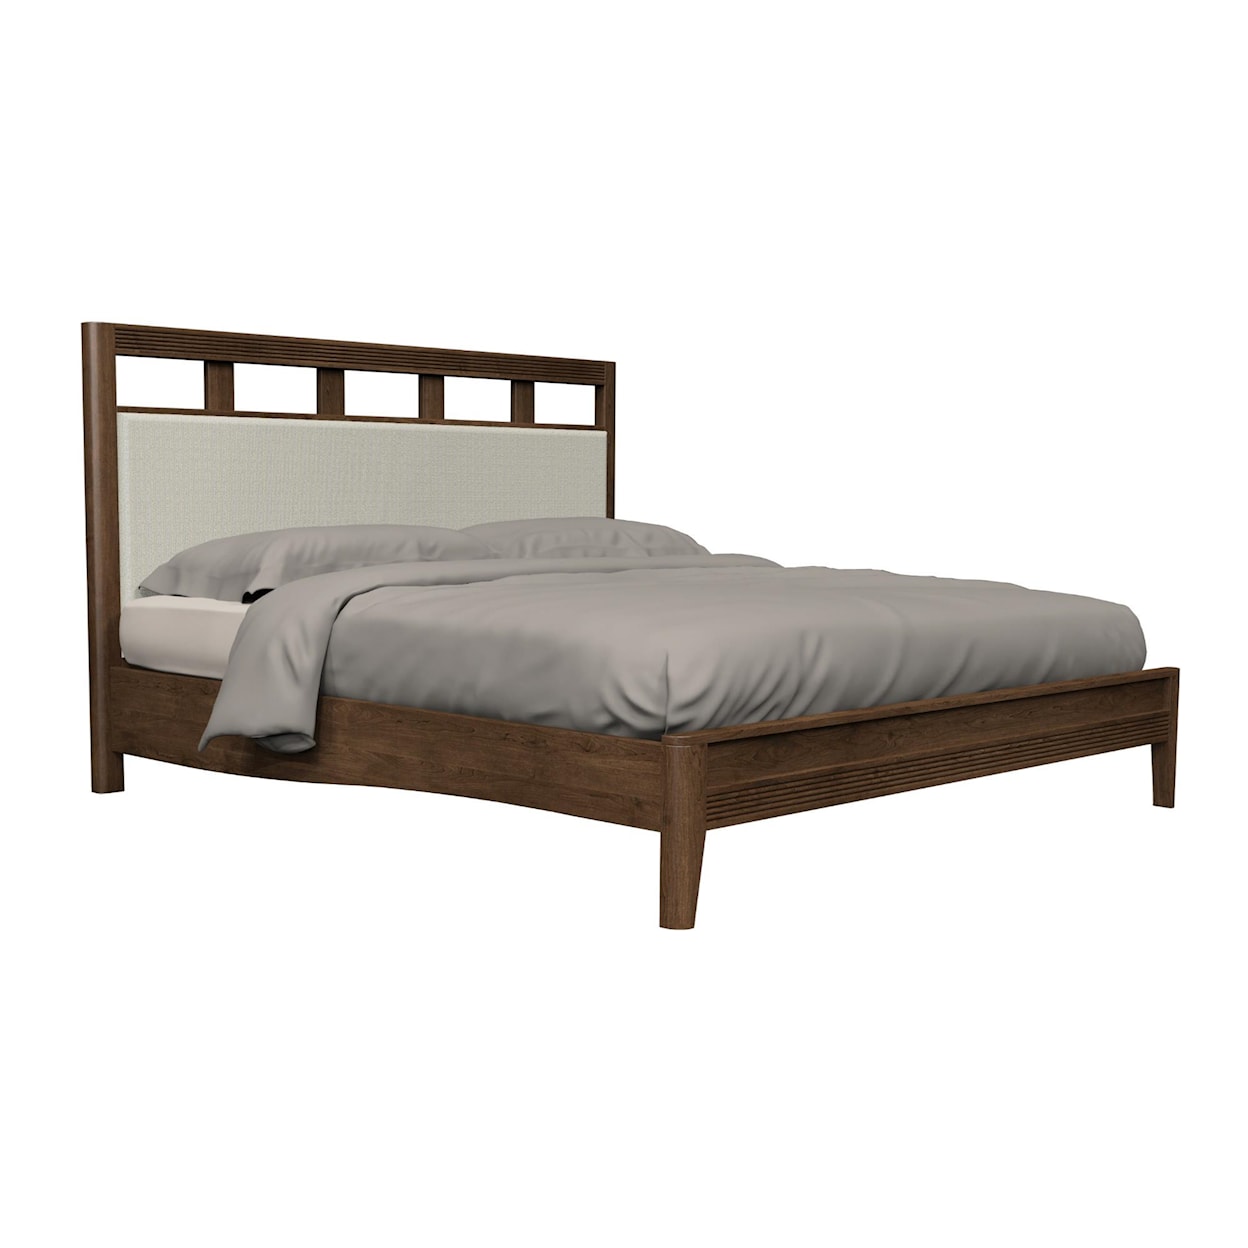 Country View Woodworking Westwood Bedroom King Bed